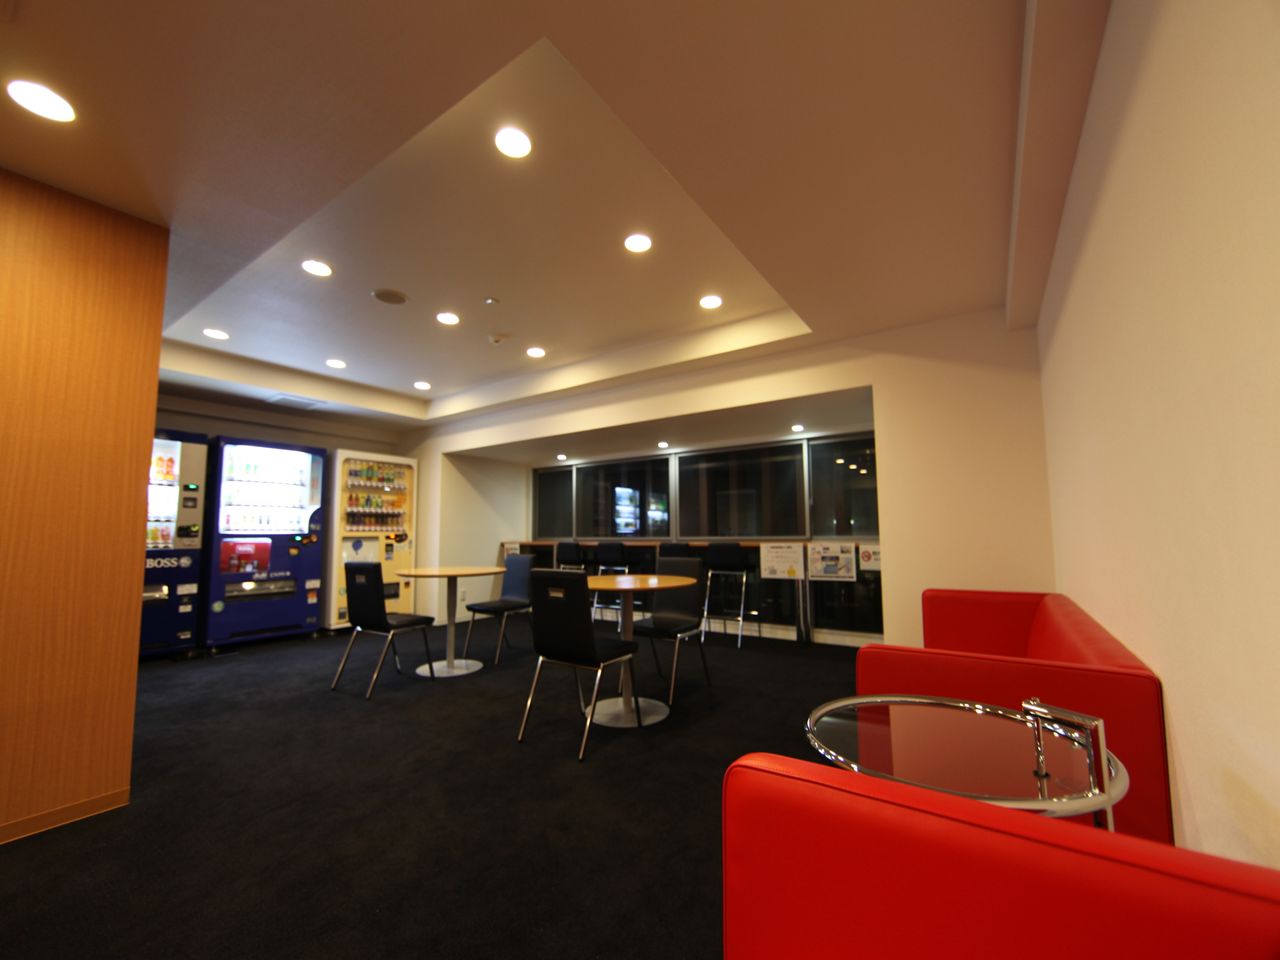 Other common areas. Lounge Space towards the tenants officials welcoming